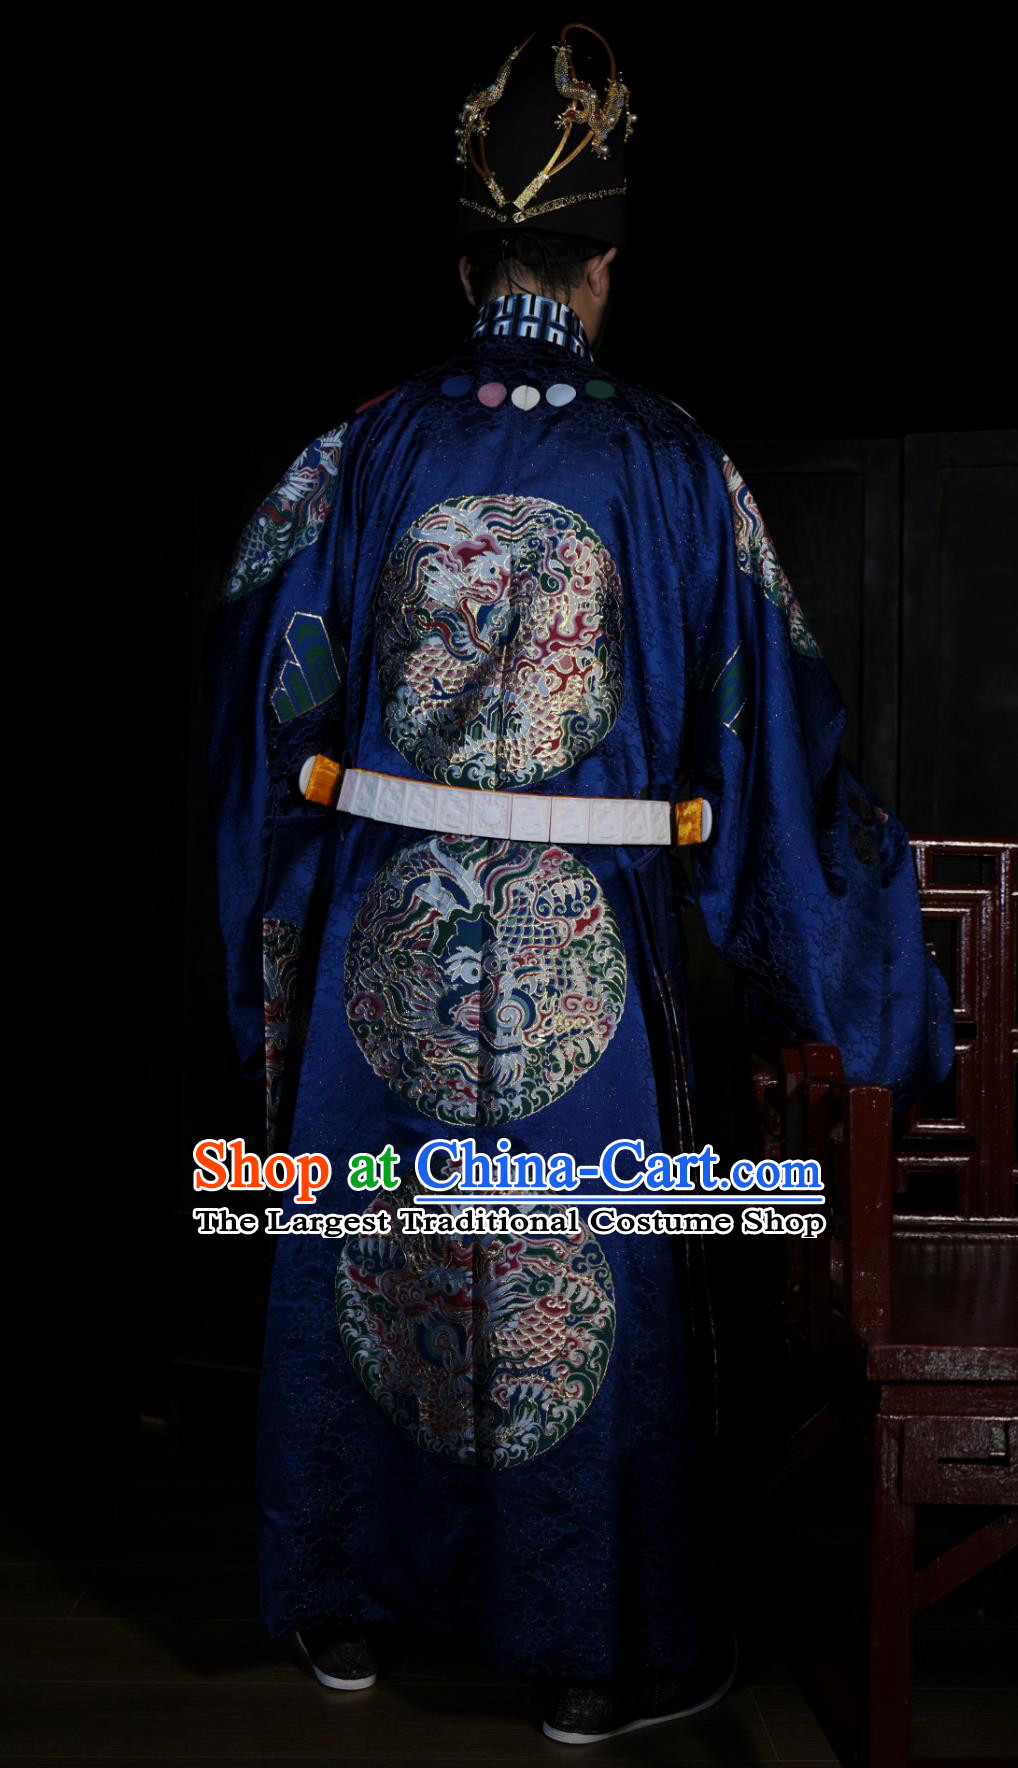 Traditional Ming Dynasty Blue Imperial Robe China Wedding Clothing Ancient Chinese Emperor Costume